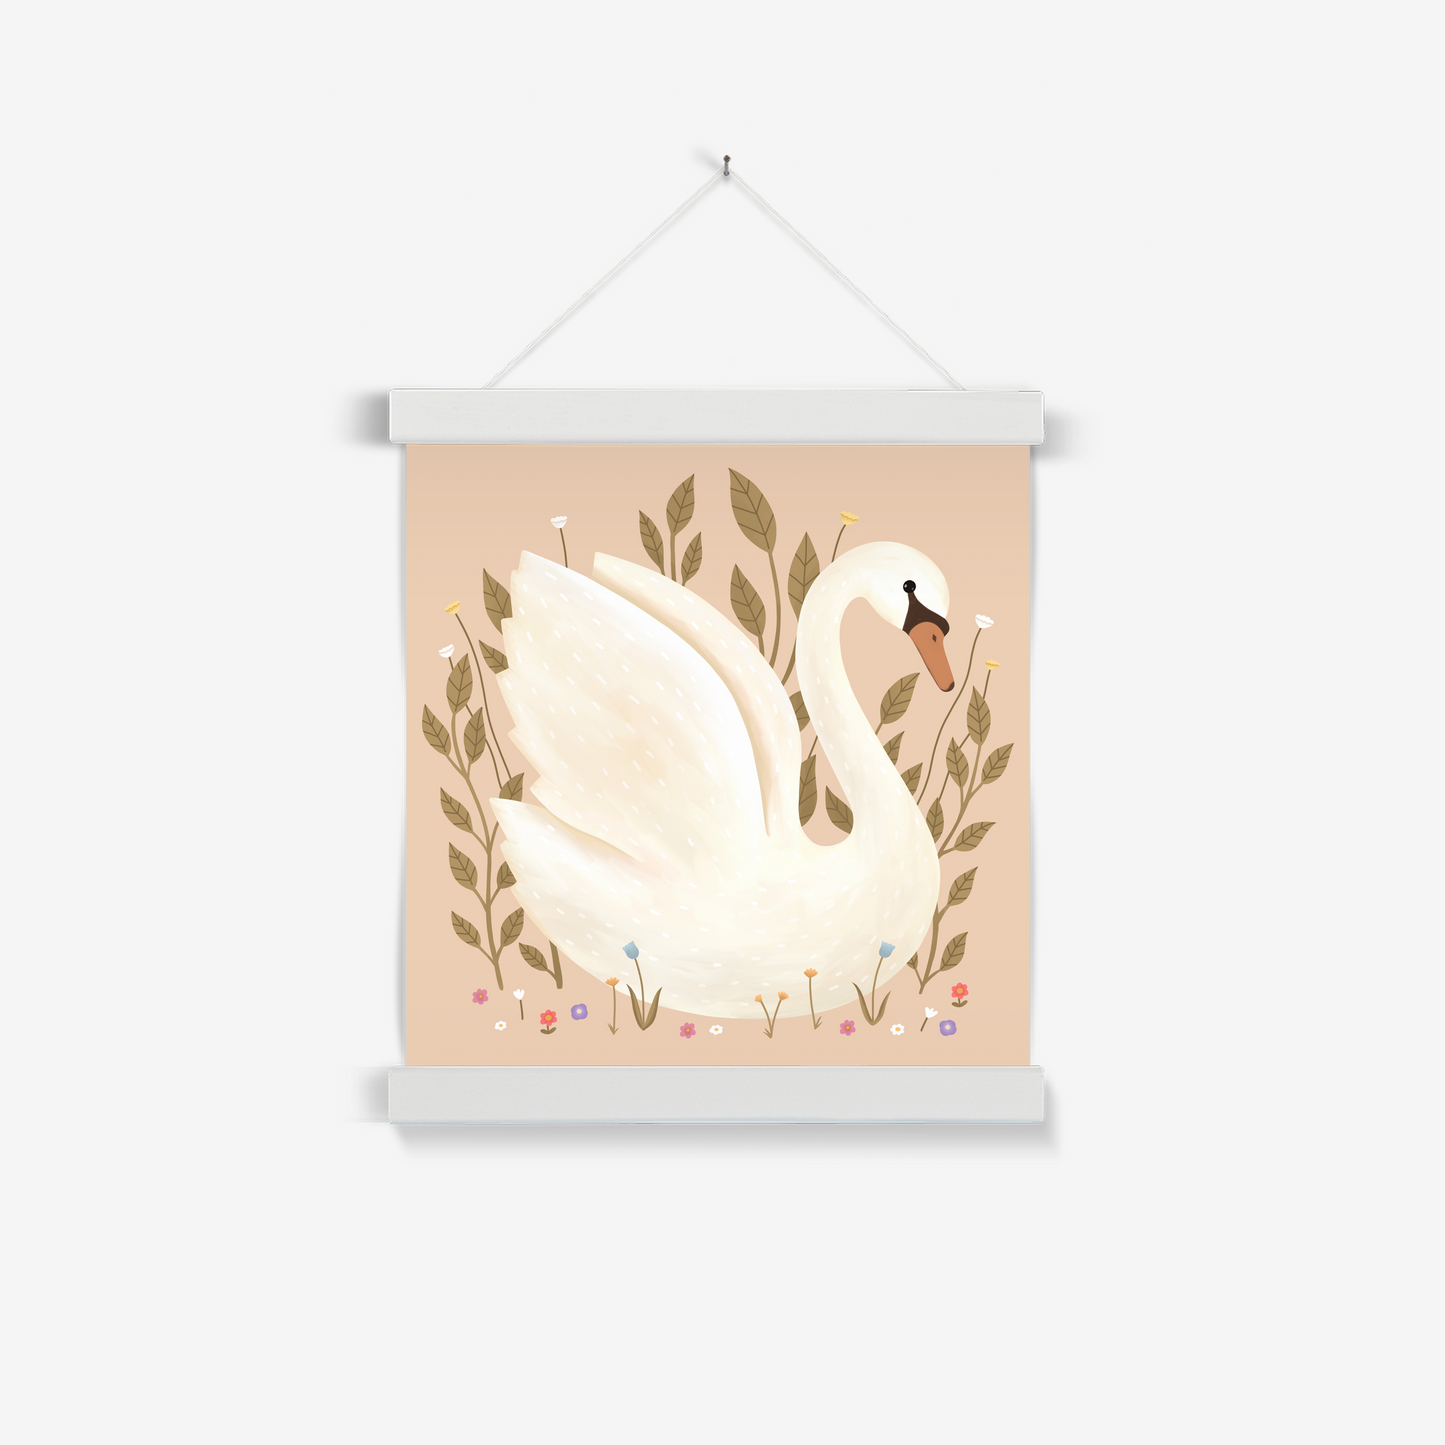 Swan in peach / Print with Hanger